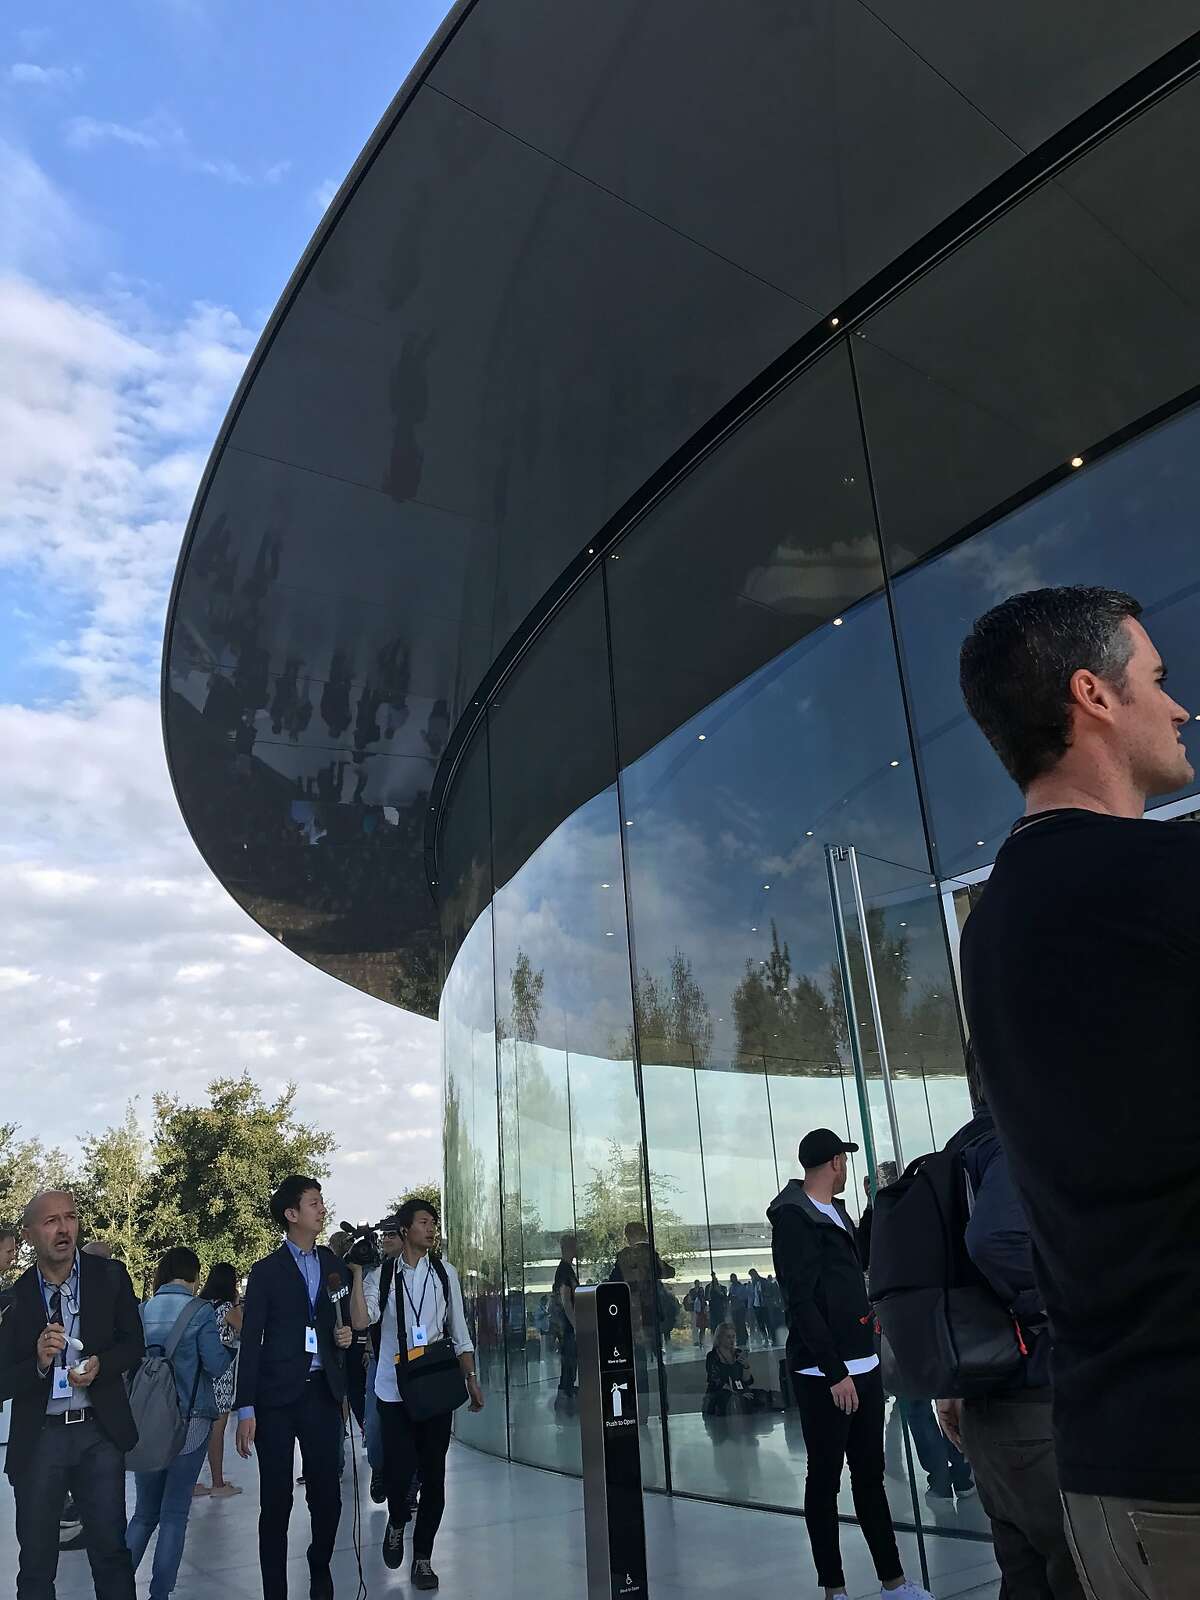 Scenes outside the Steve Jobs Theater on the Apple Park headquarters campus in Cupertino on Tuesday before the company reveals its latest iPhones and other products